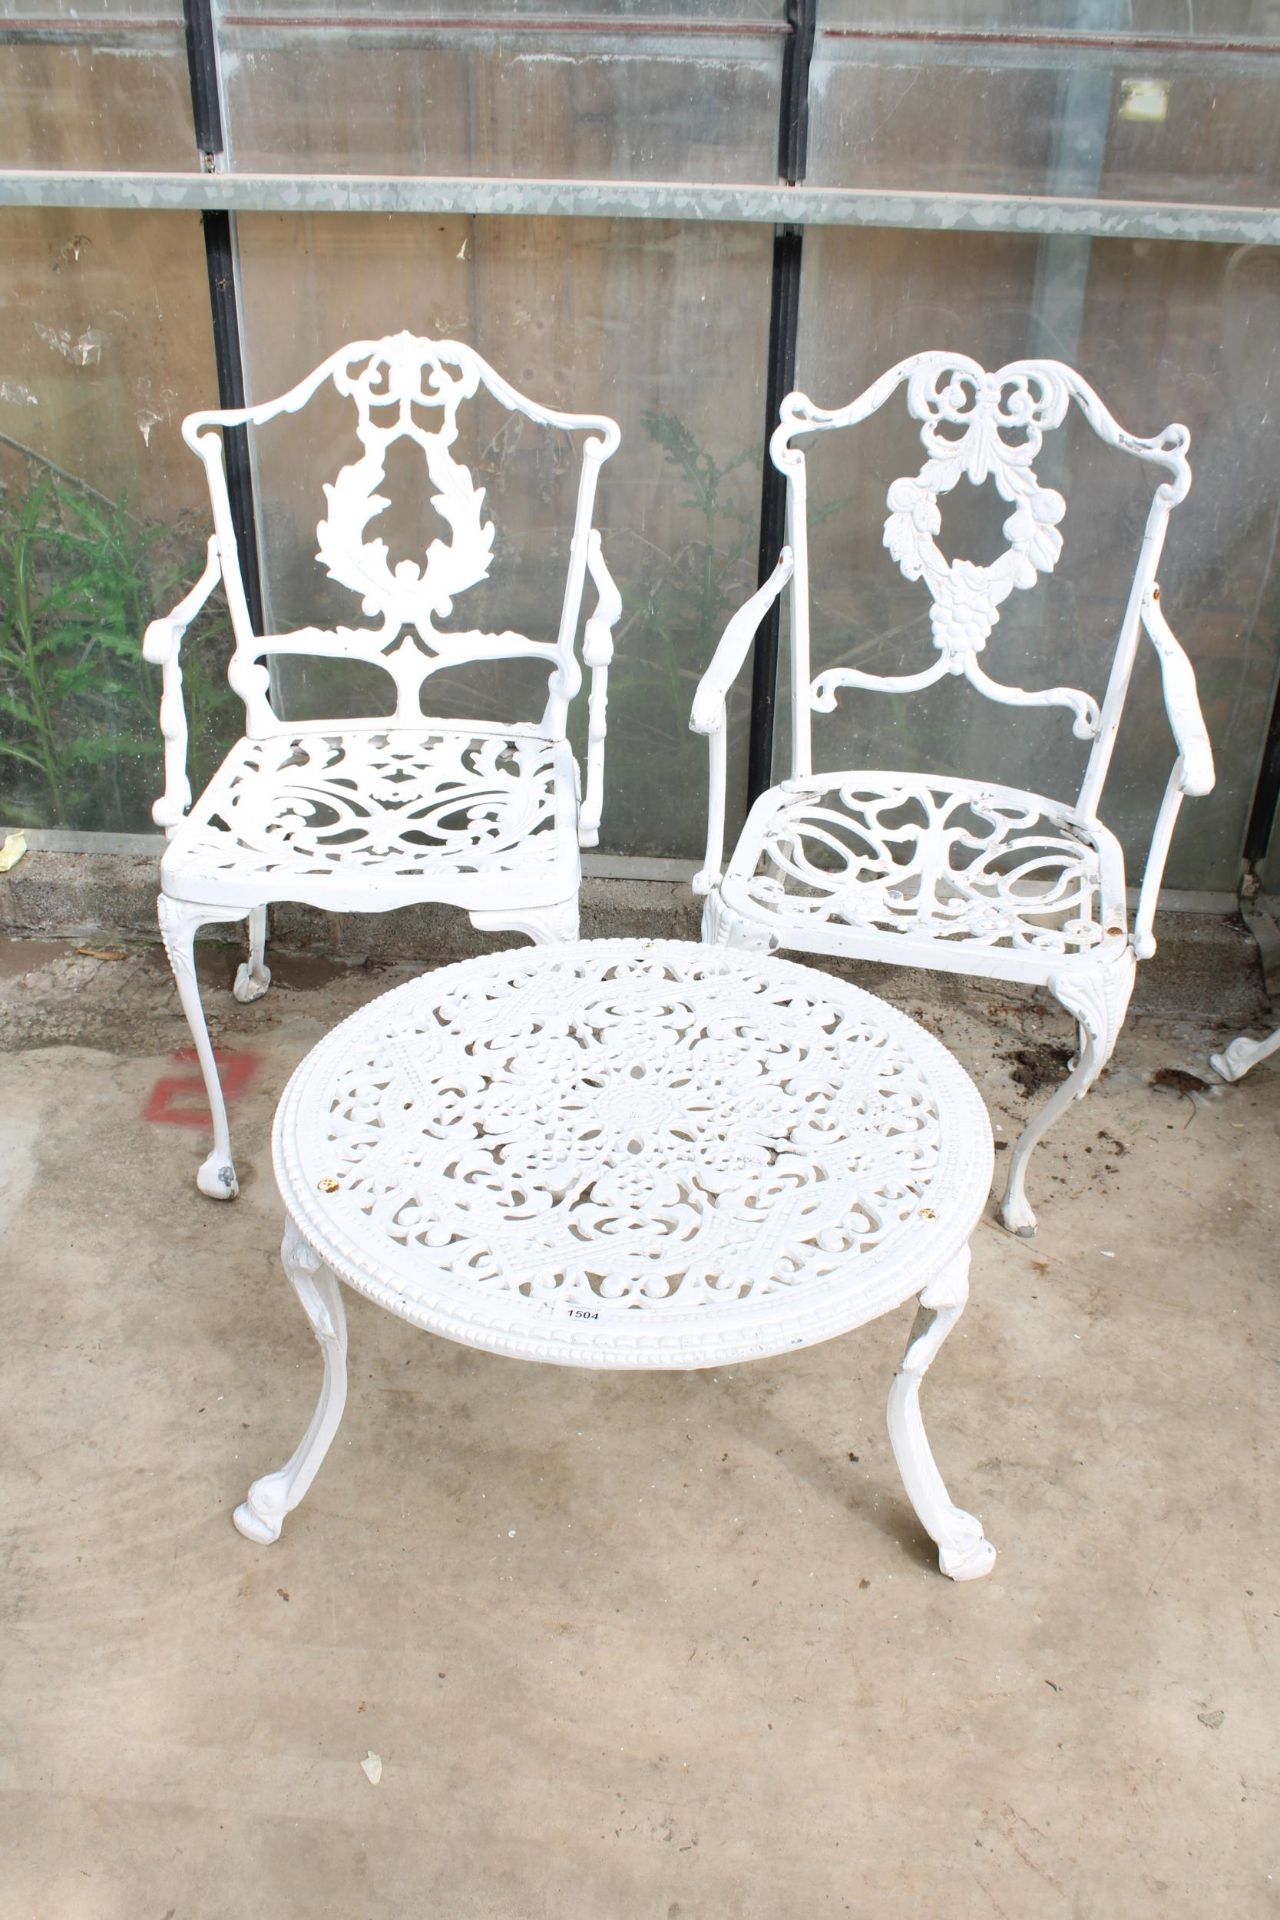 A CAST ALLOY FURNITURE SET COMPRISING OF A ROUND COFFEE TABLE AND TWO CARVER CHAIRS